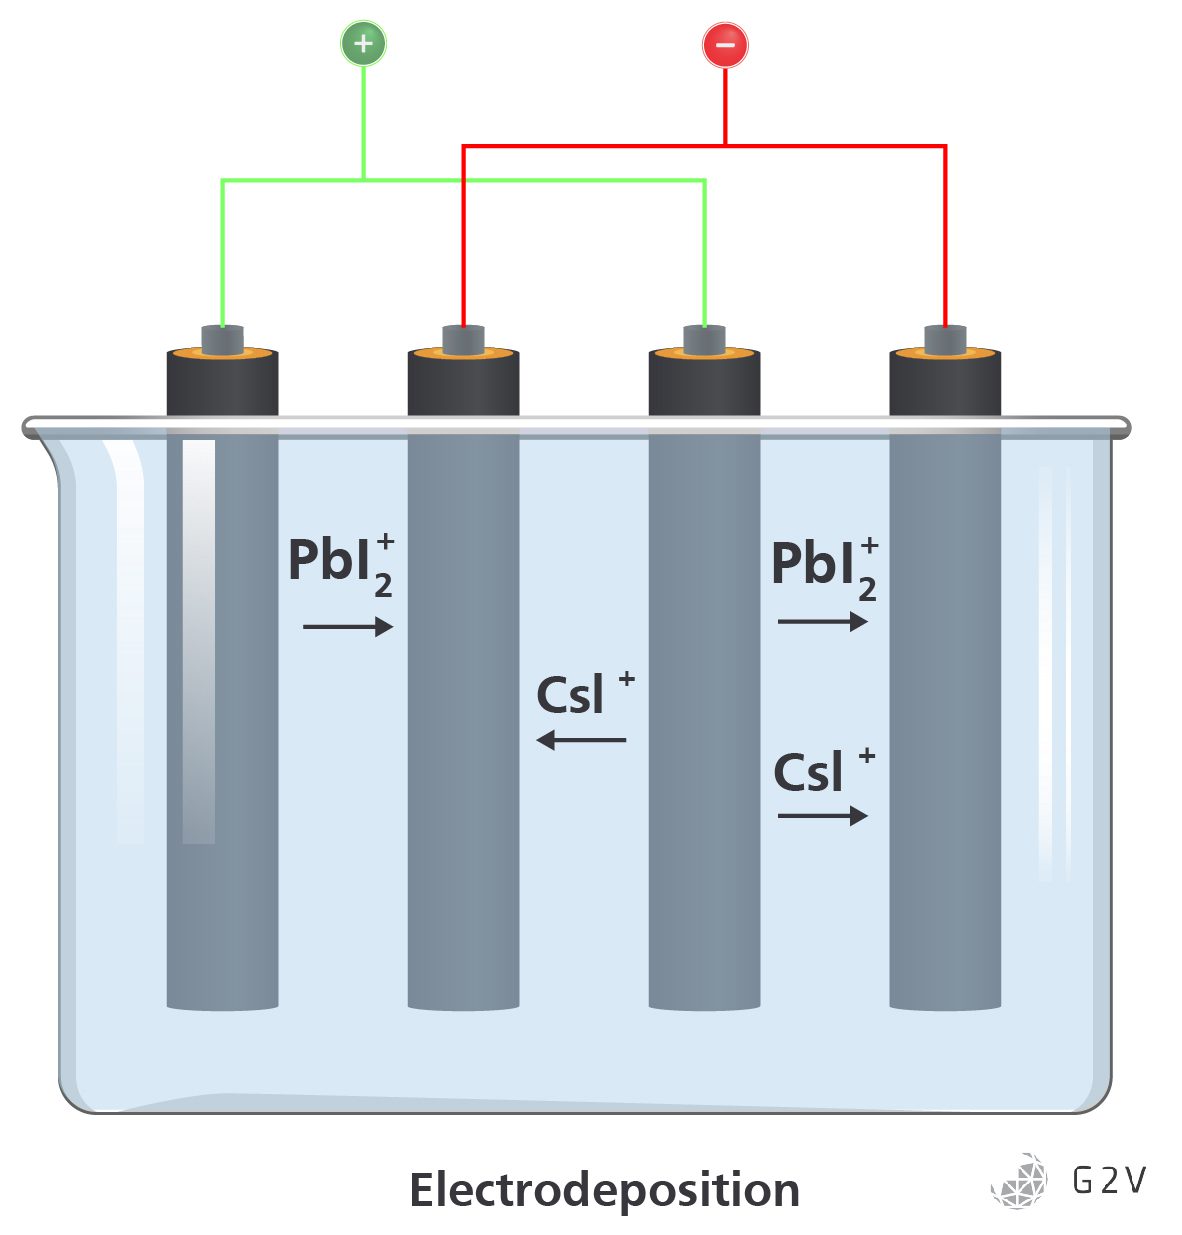 A basic showcase of how electrodeposition works for the creation of perovskite films